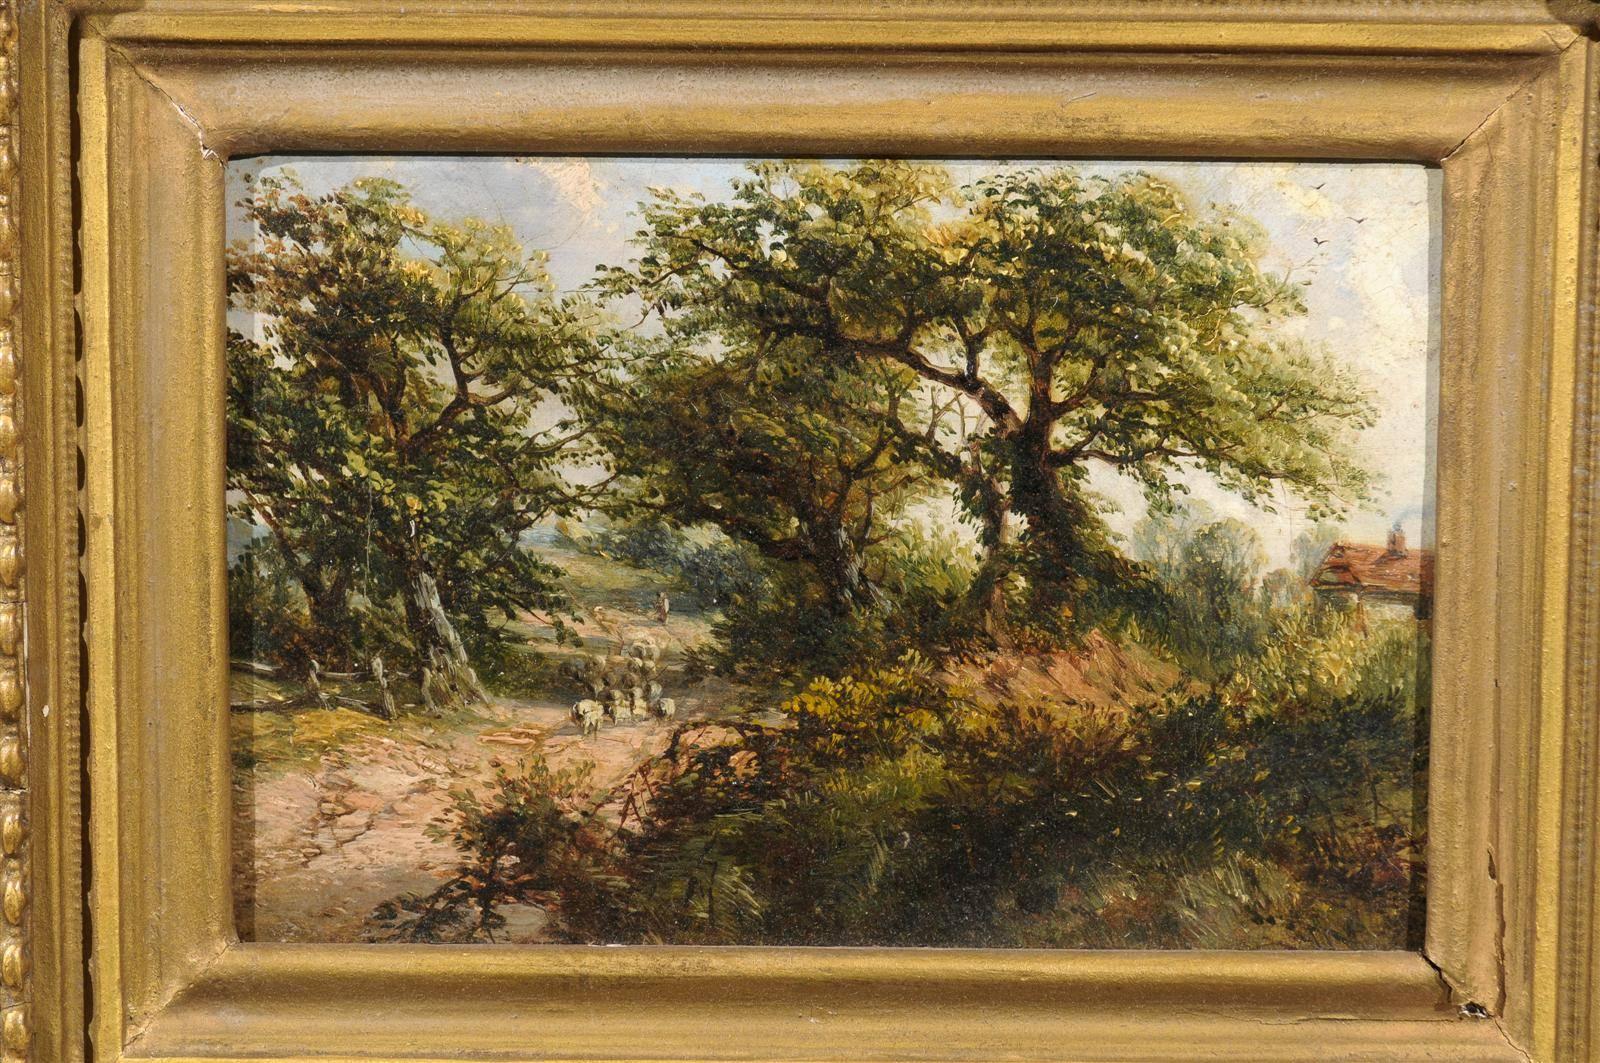 Gilt Framed 19th Century Oil on Canvas Landscape Painting, English 1